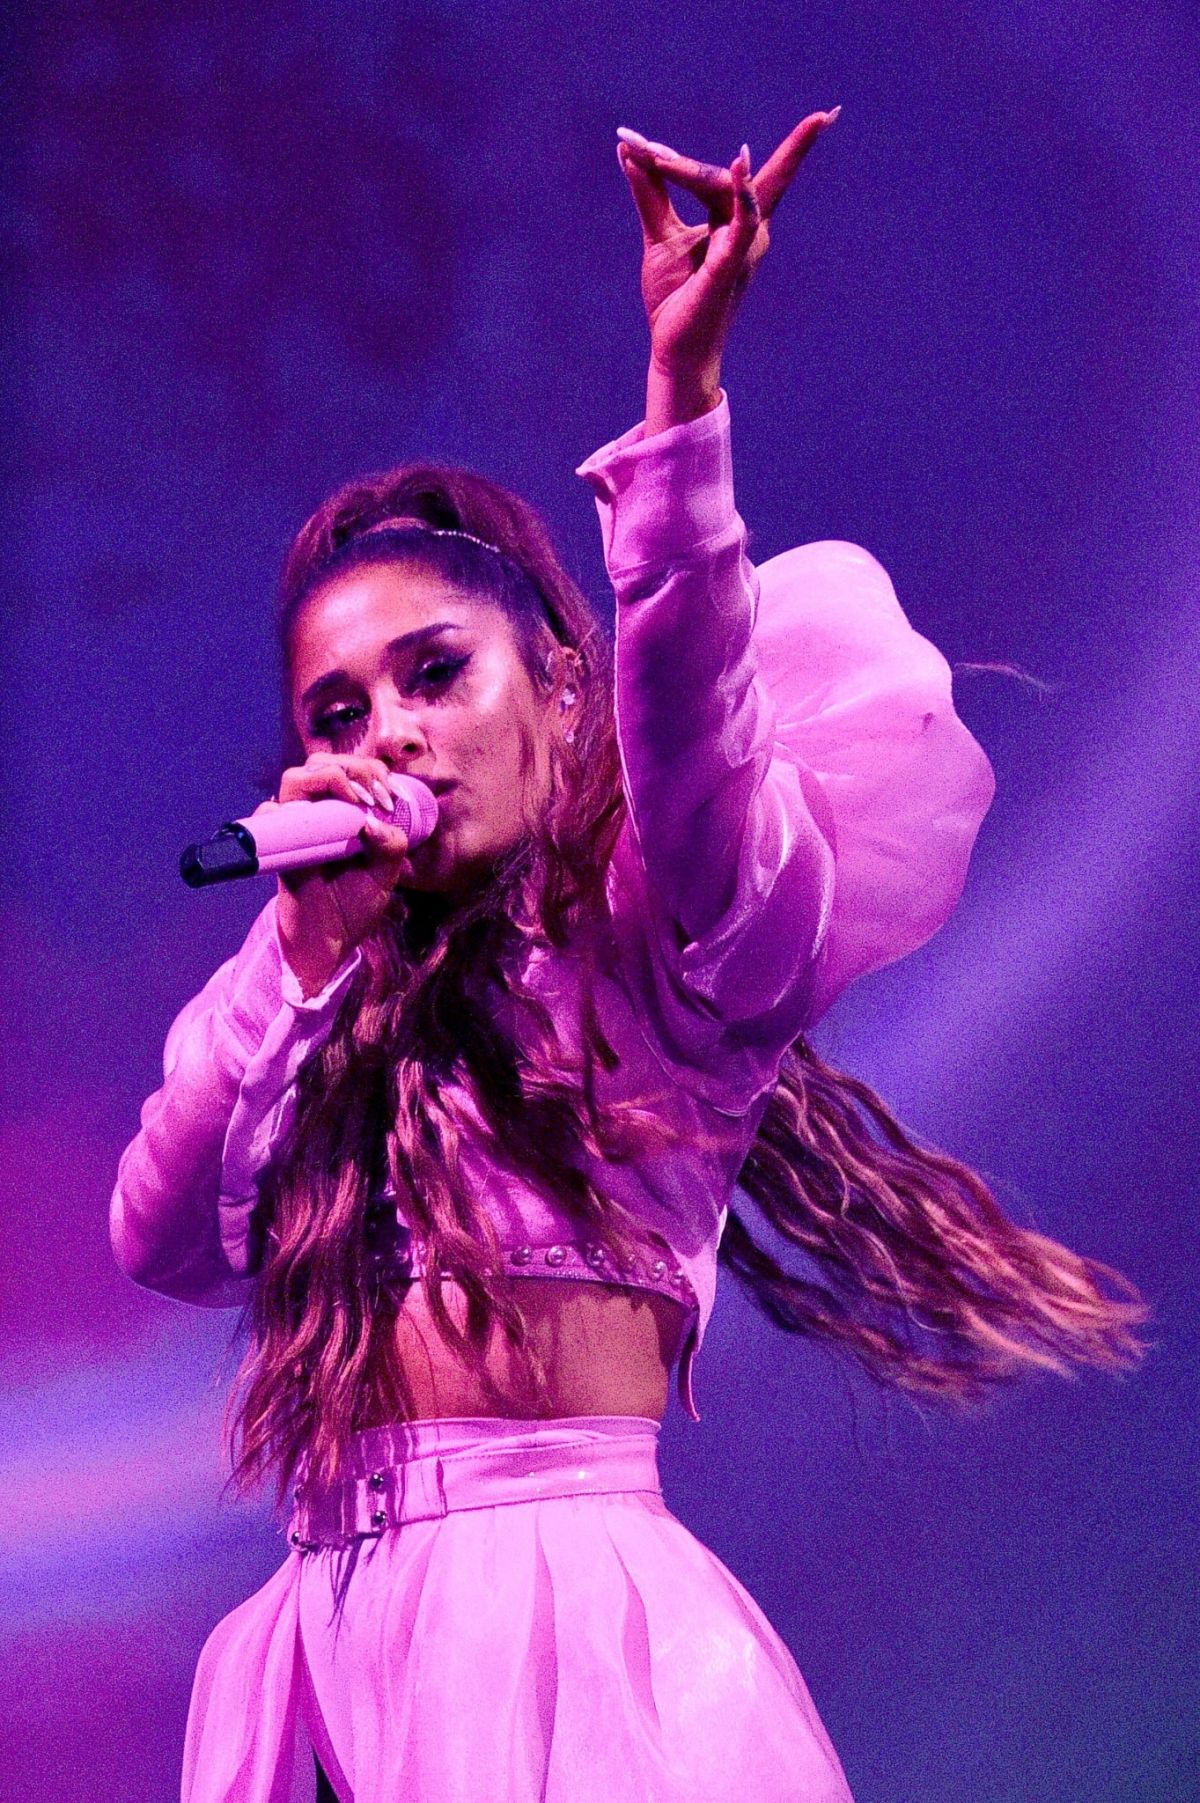 ariana-grande-performs-at-final-night-of-lollapalooza-in-chicago-08-04-2019-21.jpg